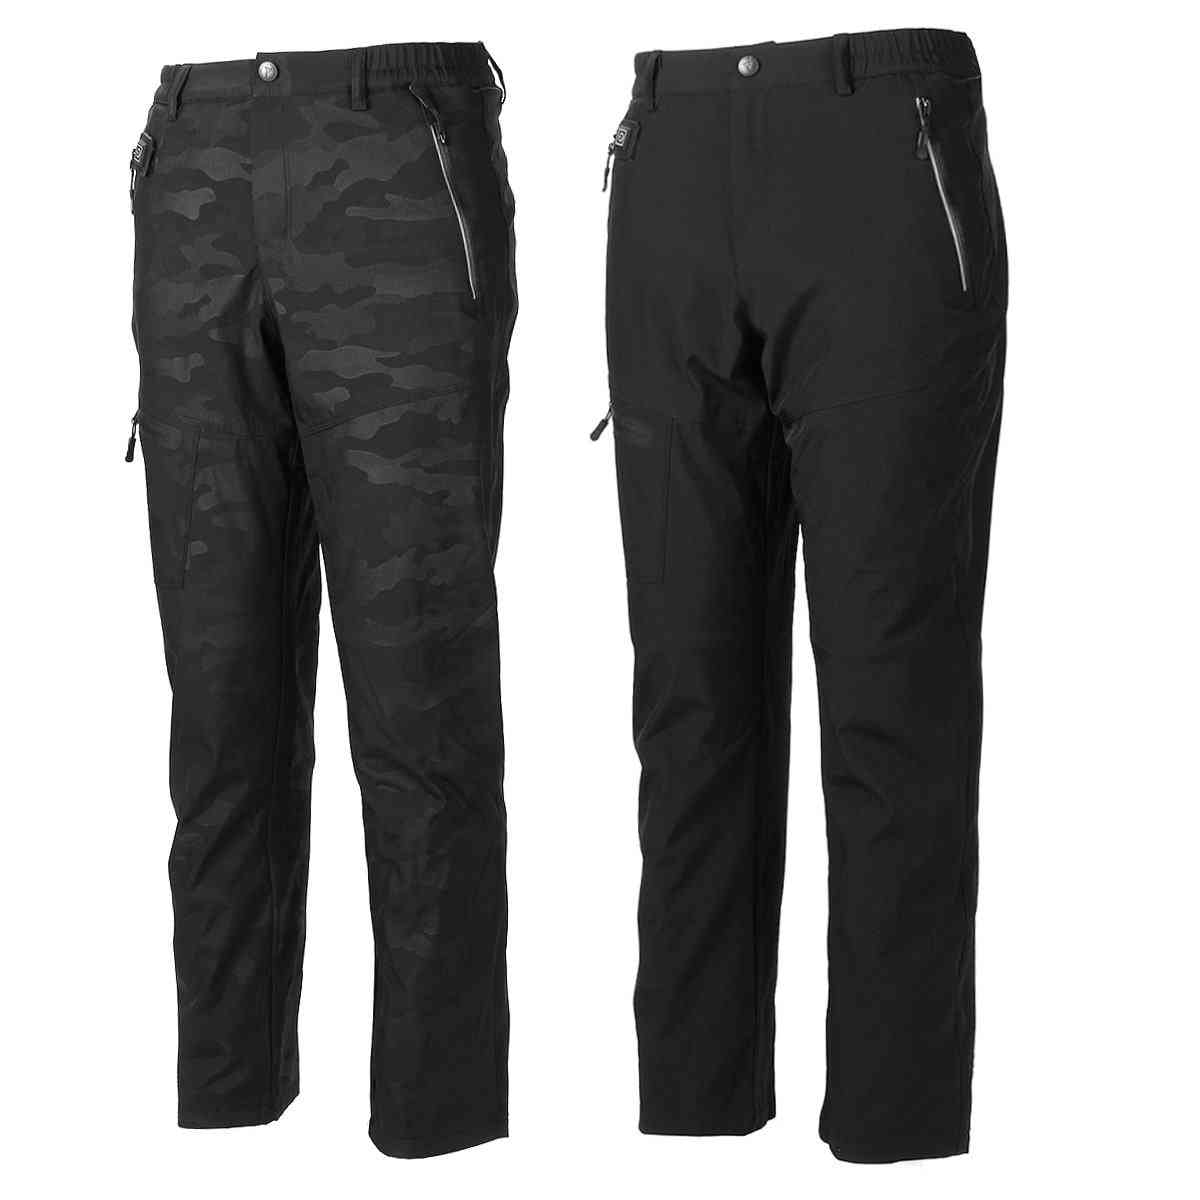 Men Women Usb Electric Heating Winter Intelligent Warm Trousers Pant For Outdoor Sport